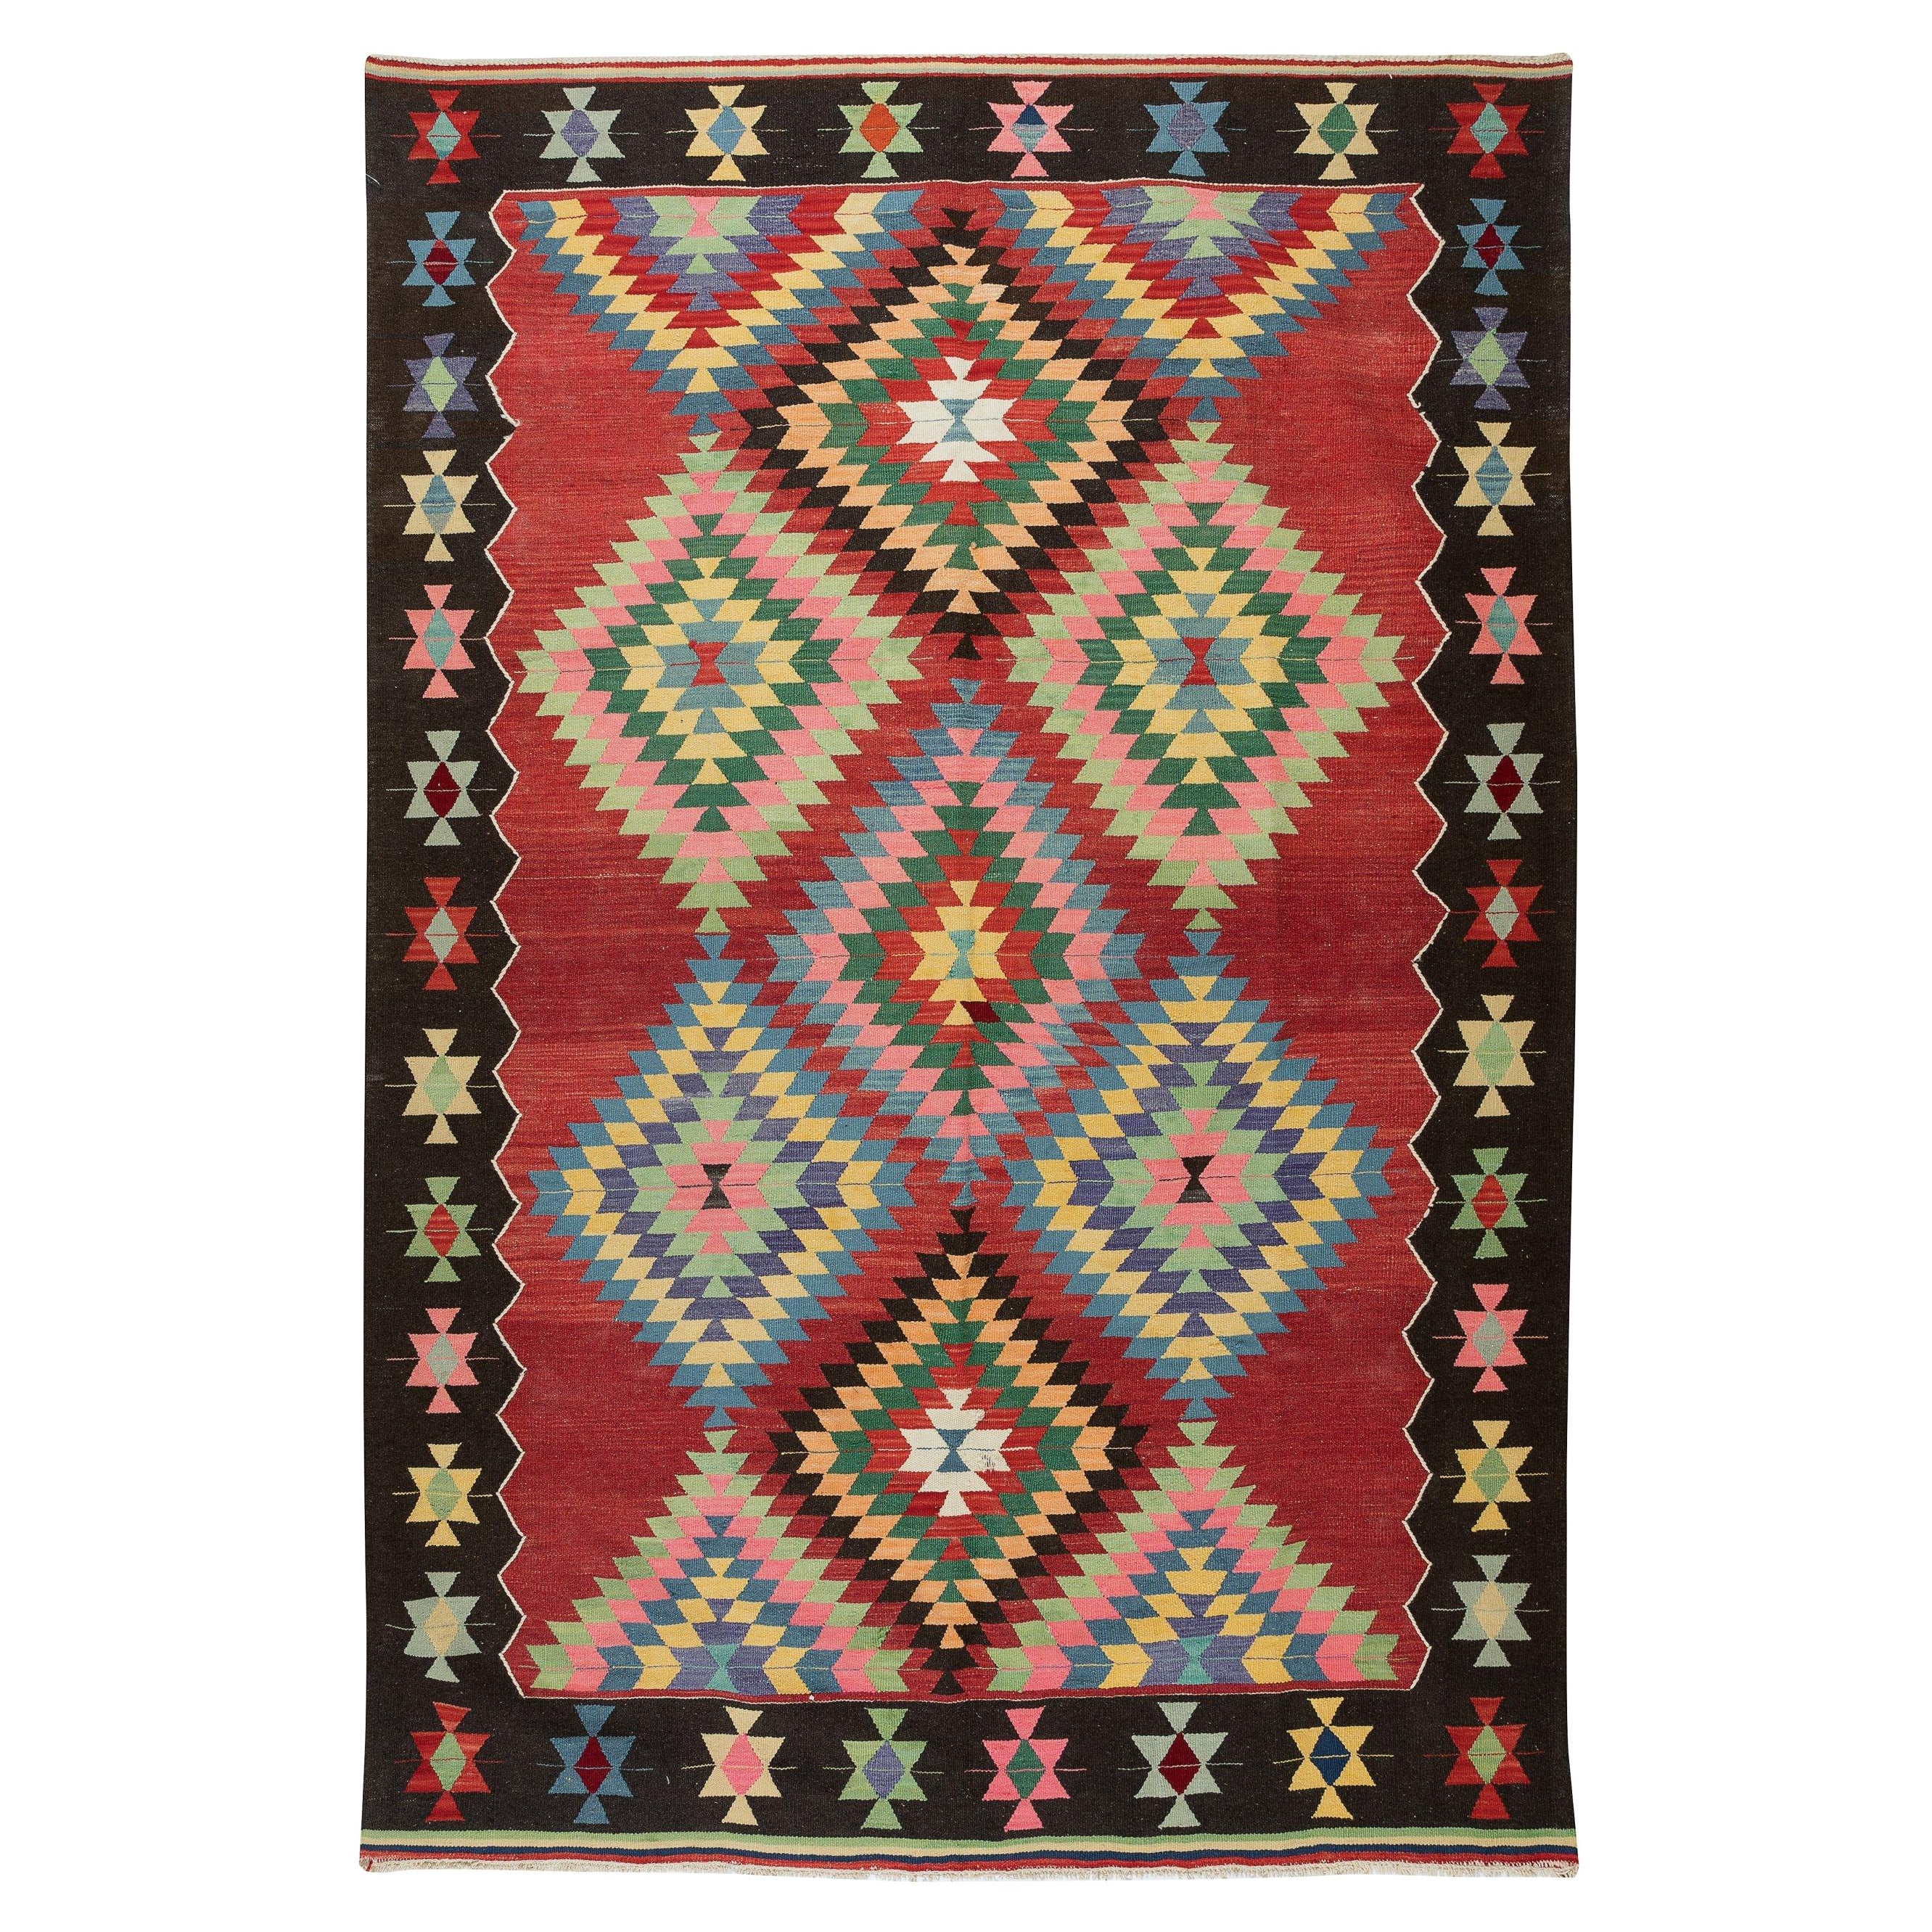 6x8.7 Ft Colorful HandWoven Vintage Turkish Wool Kilim Rug with Geometric Design For Sale